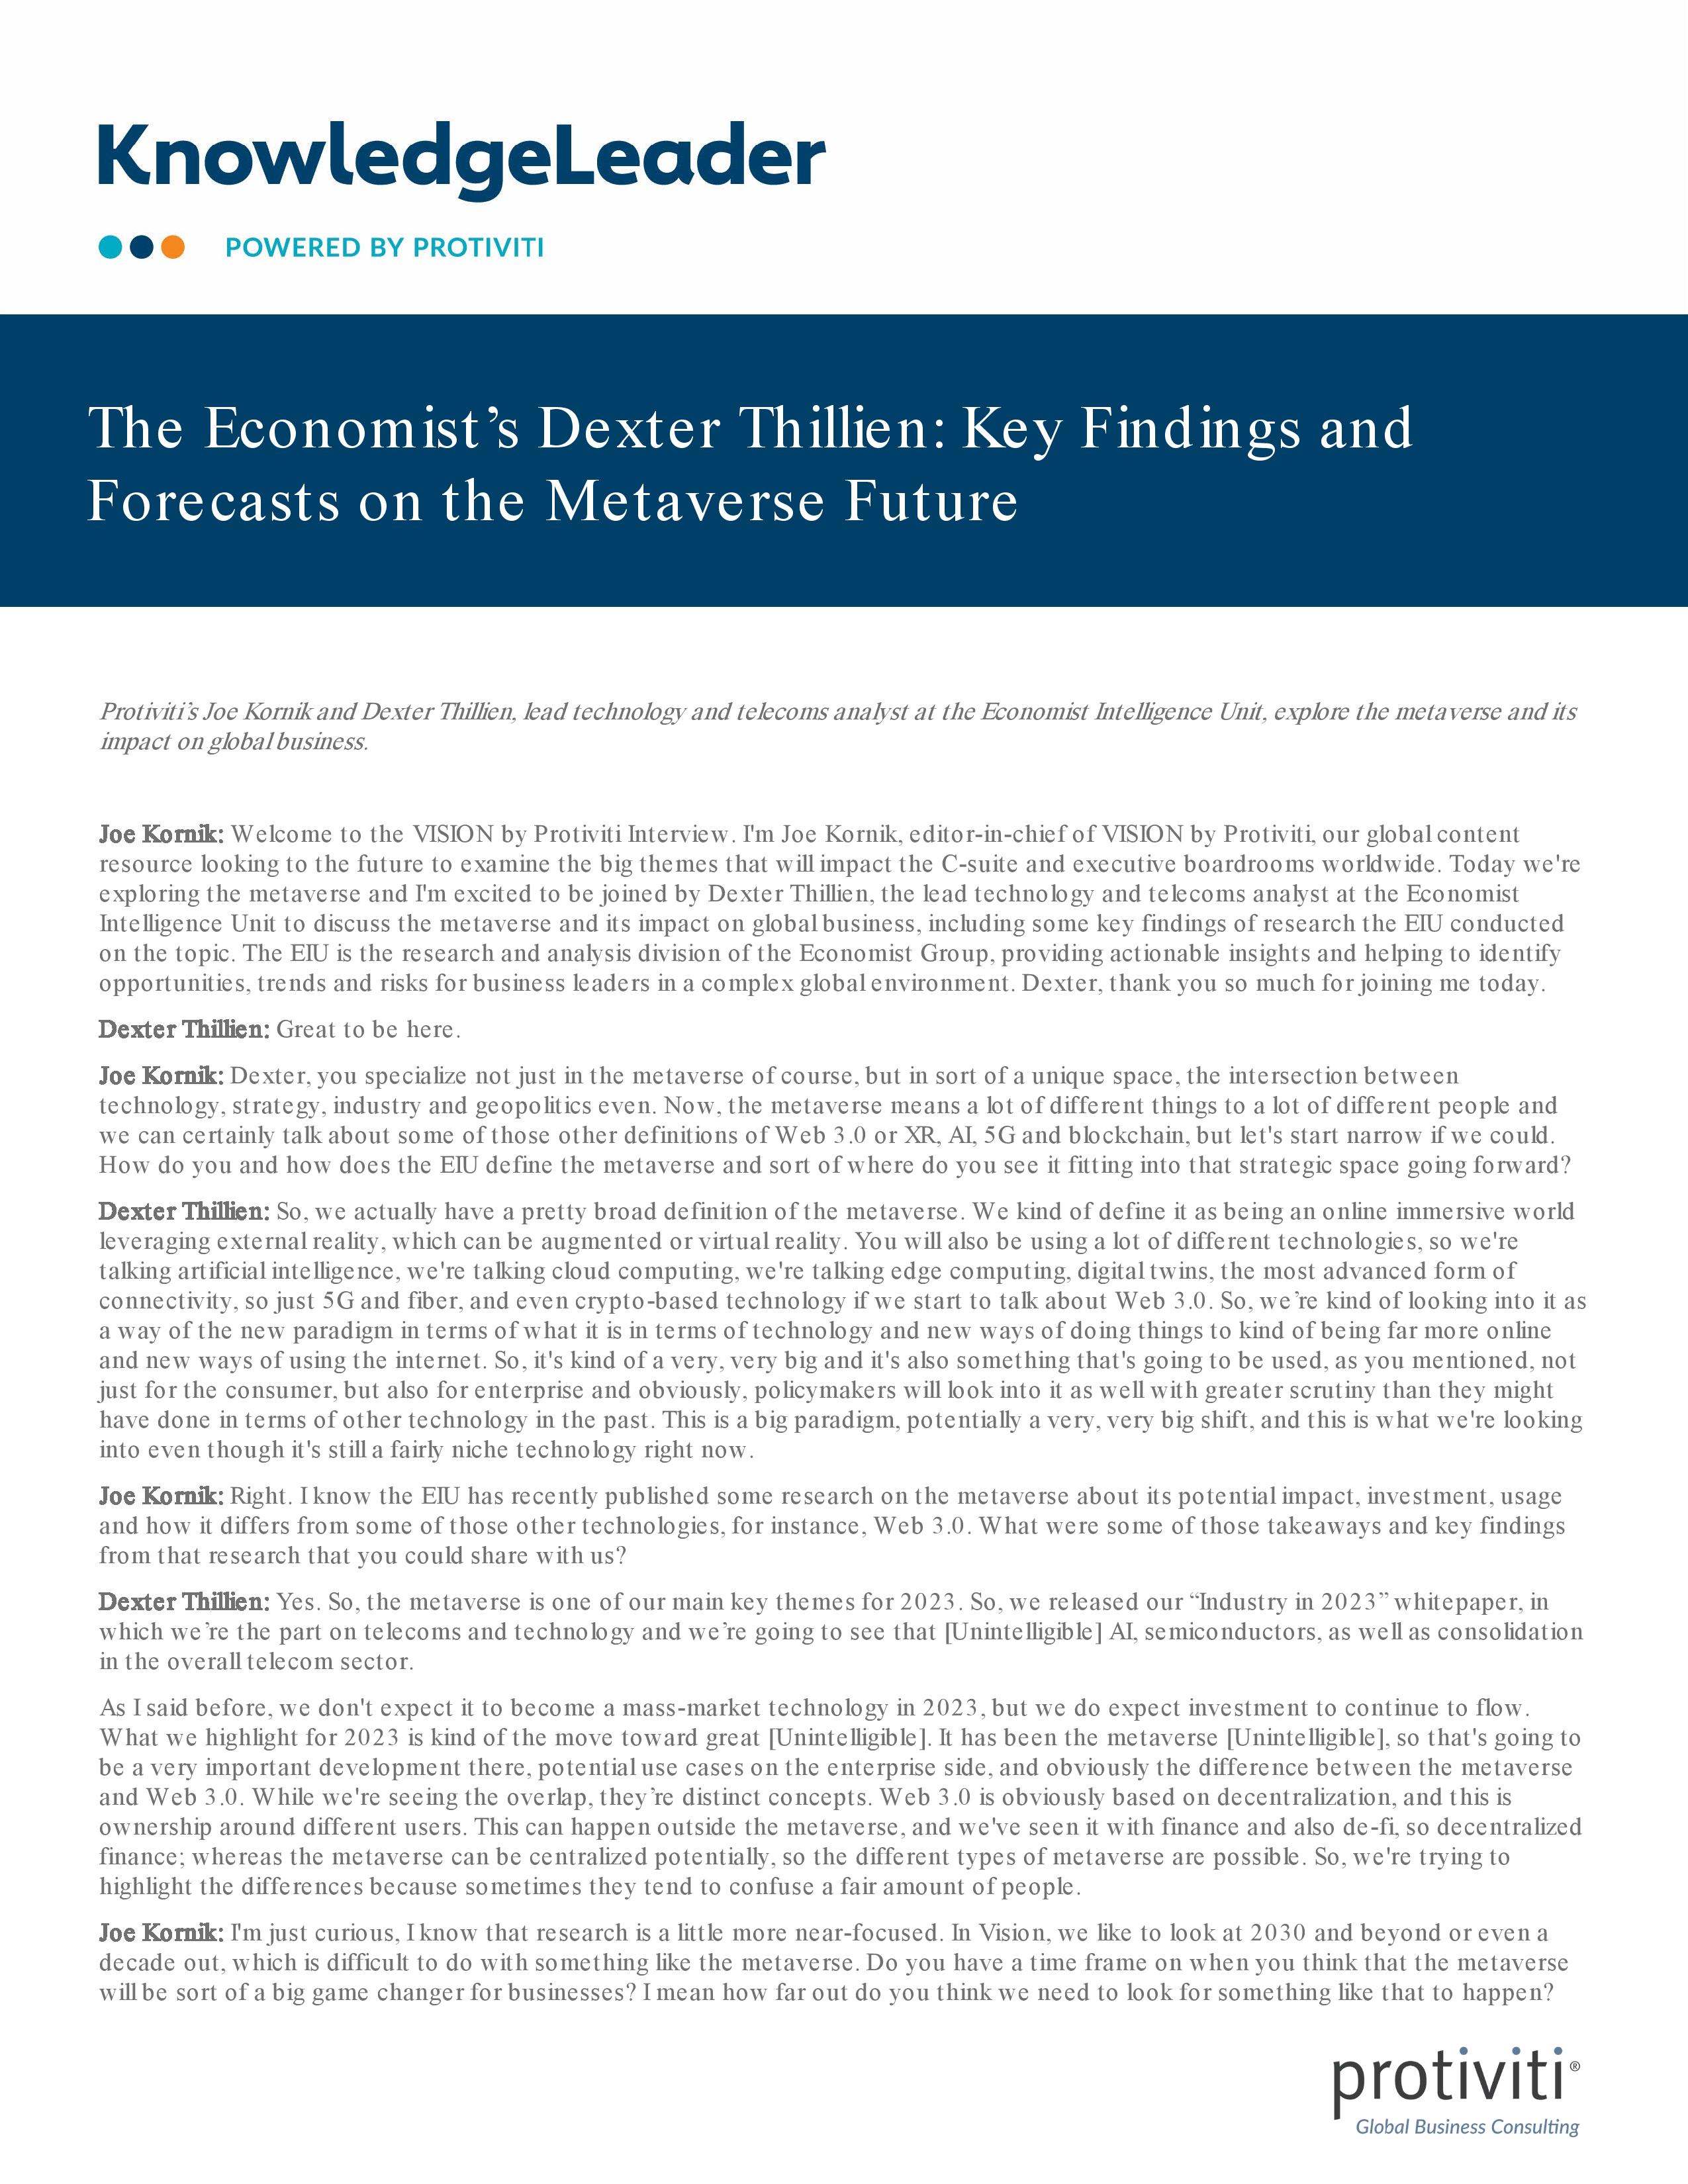 Screenshot of the first page of The Economist’s Dexter Thillien Key Findings and Forecasts on the Metaverse Future